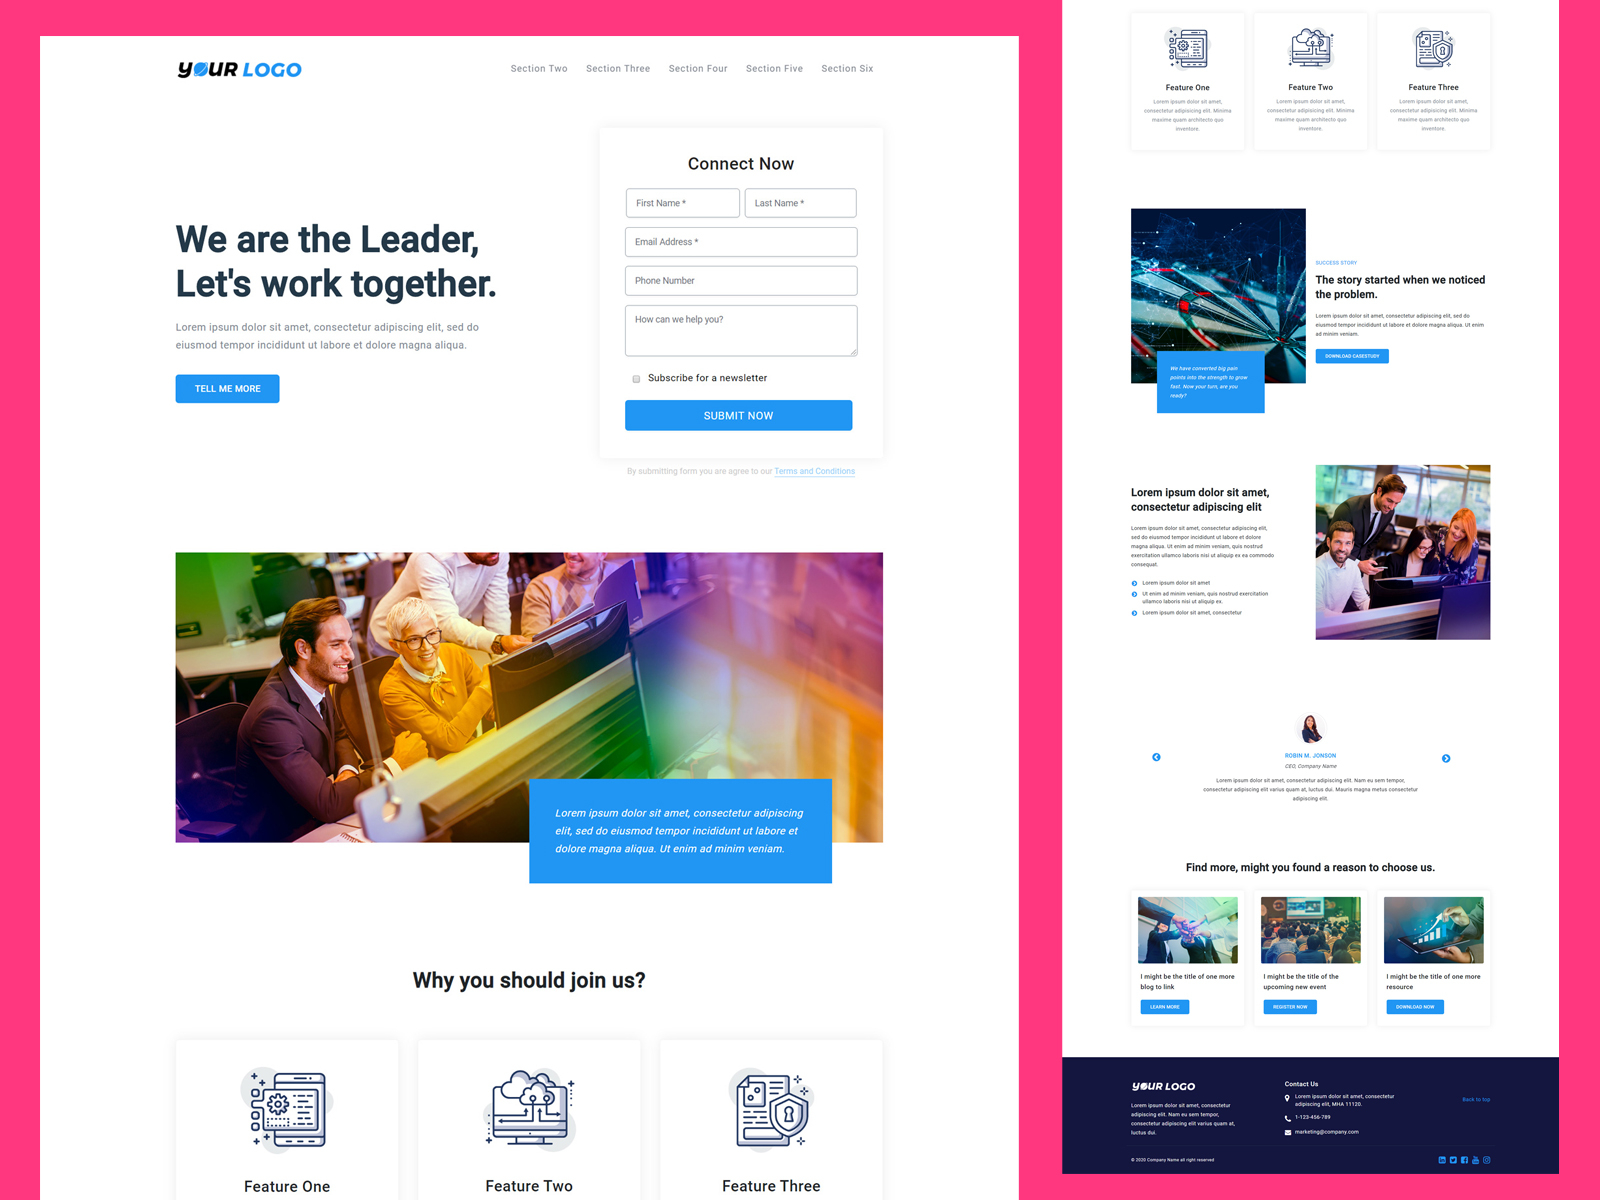 Pardot landing page layout template by Haridas Patil on Dribbble